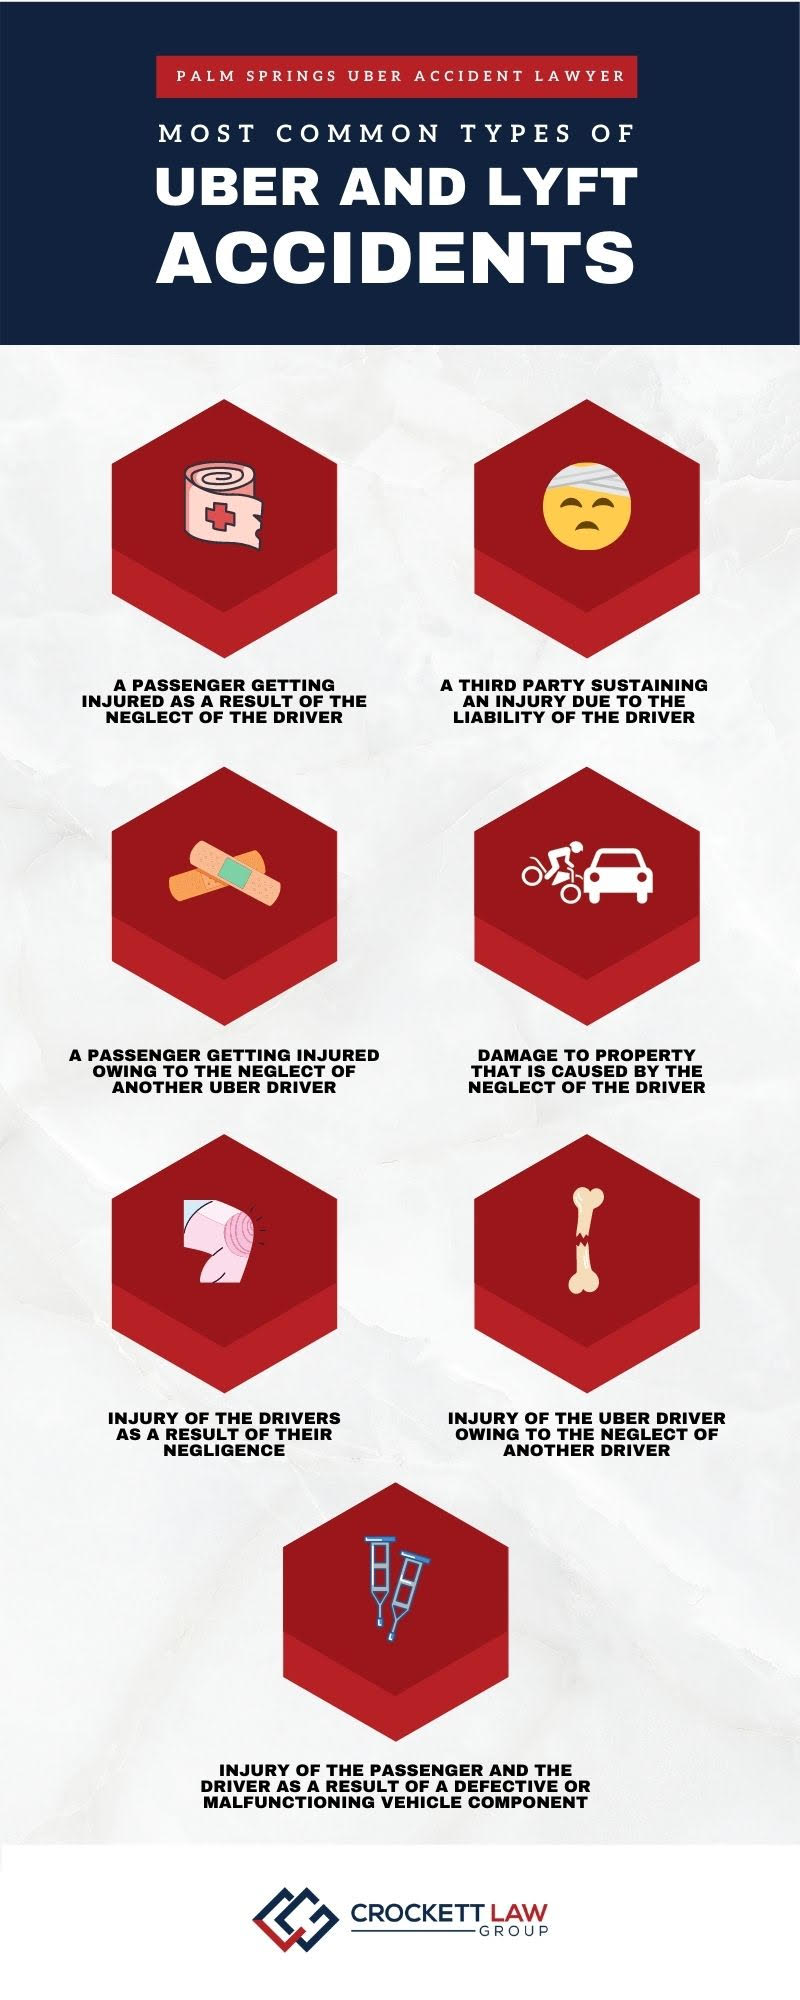 Palm Spring Uber Accident Lawyer Infographic